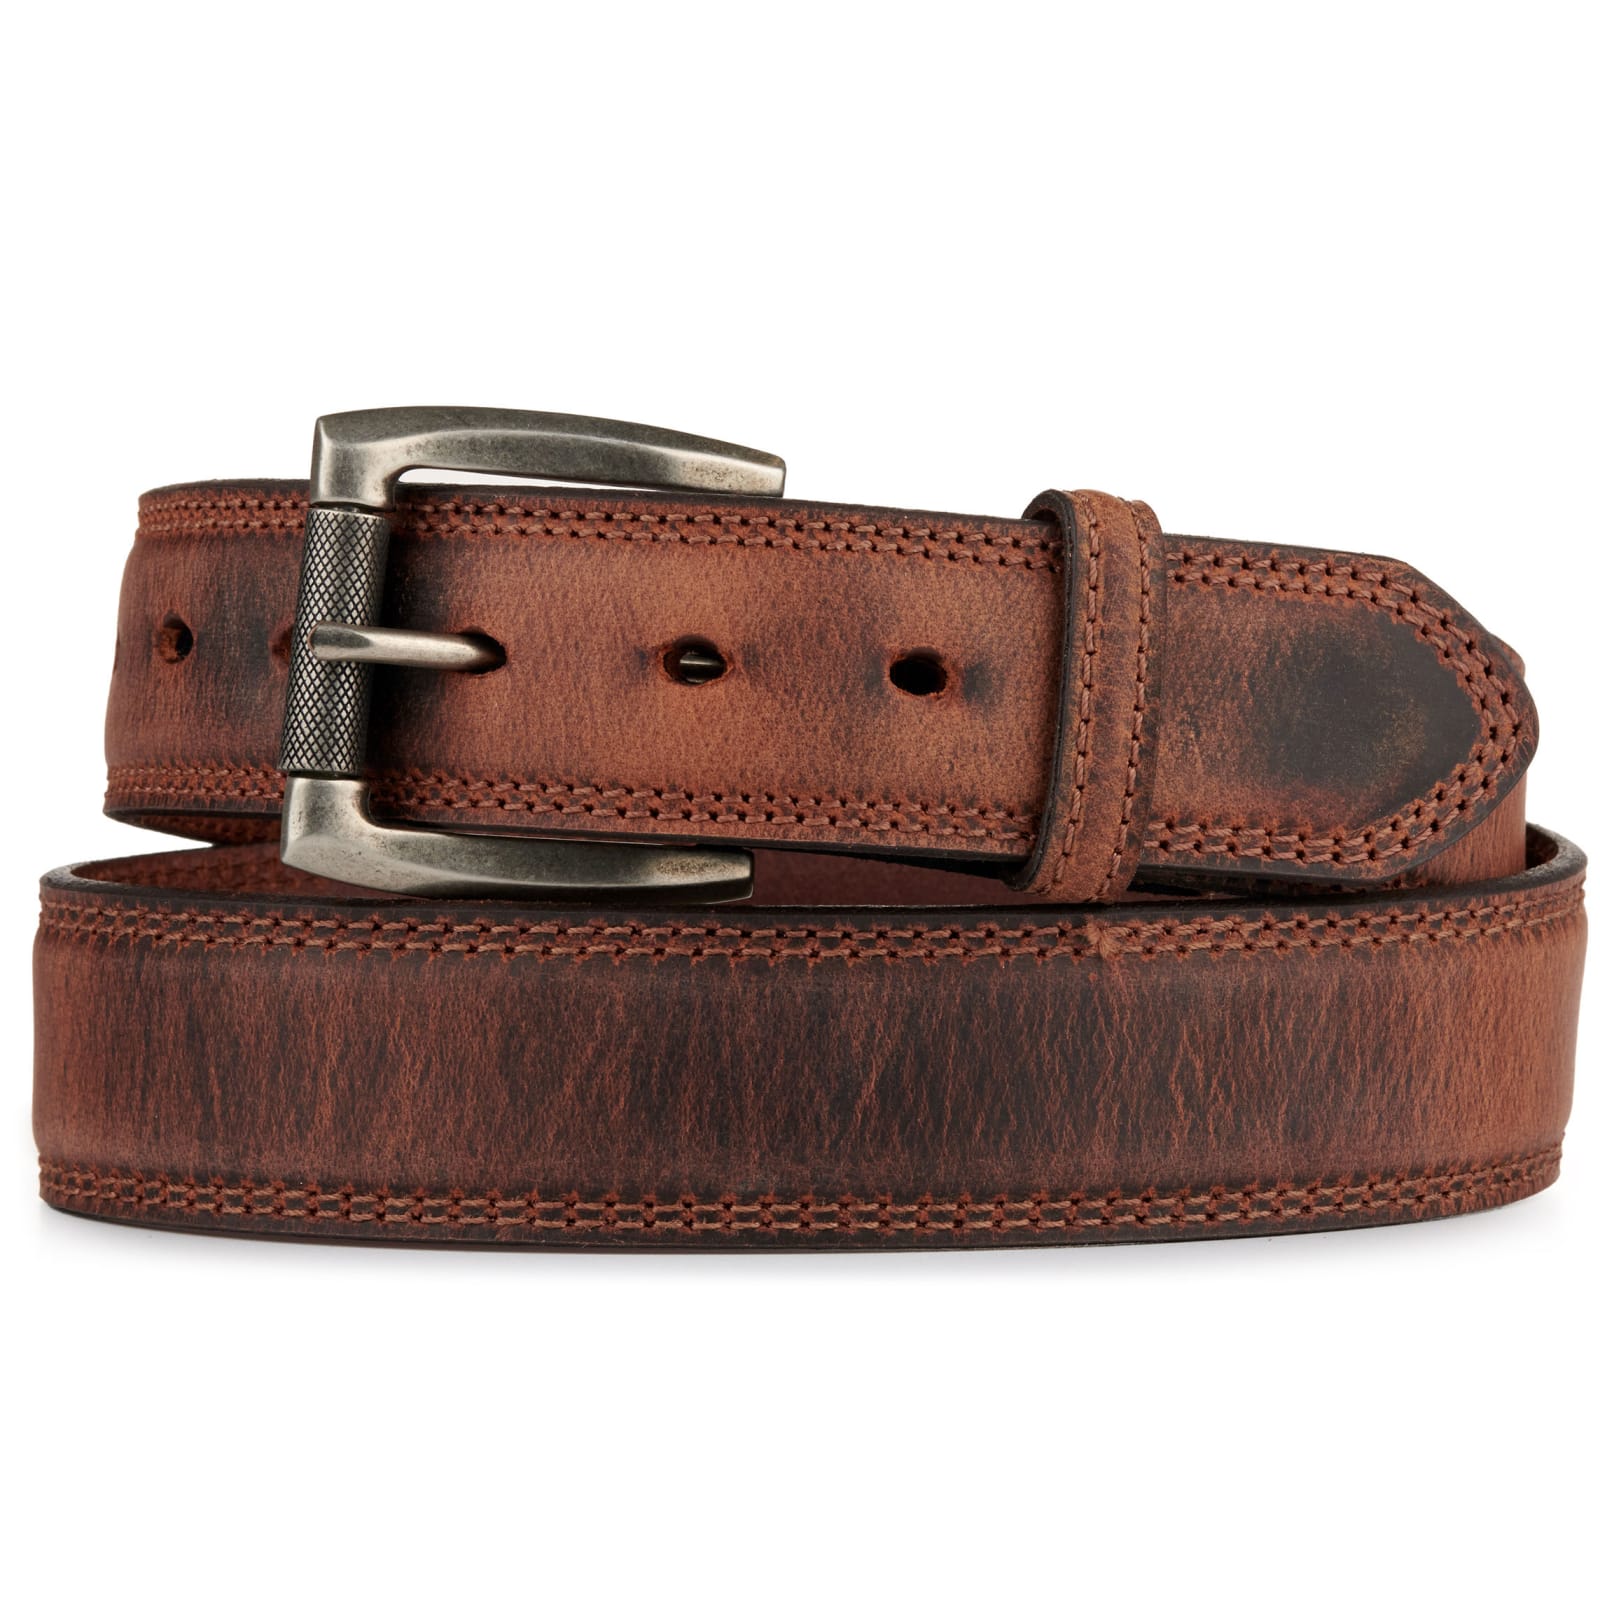 AndWest Men's Tan Leather with Knurled Buckle Western Belt available at Cavenders